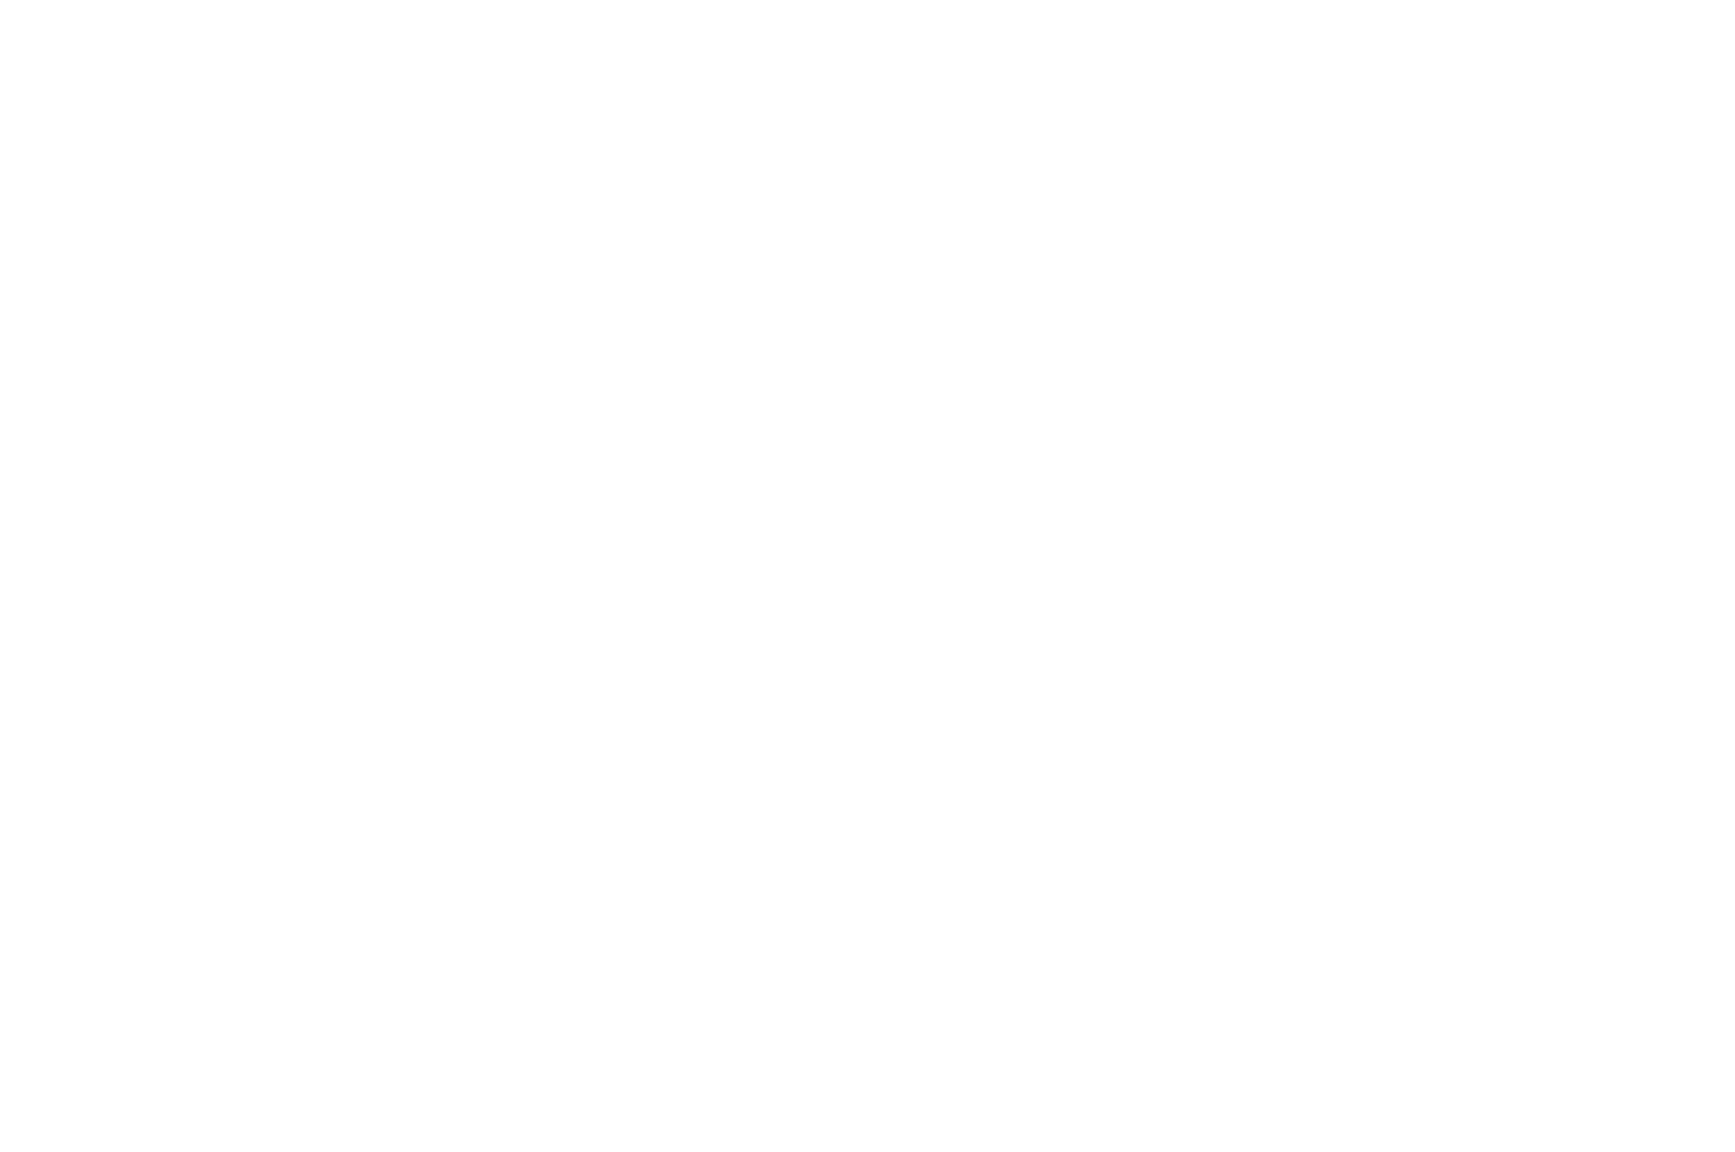 NOMINATED  - SCORE OF THE MONTH  - TMFF 2016 (1).png